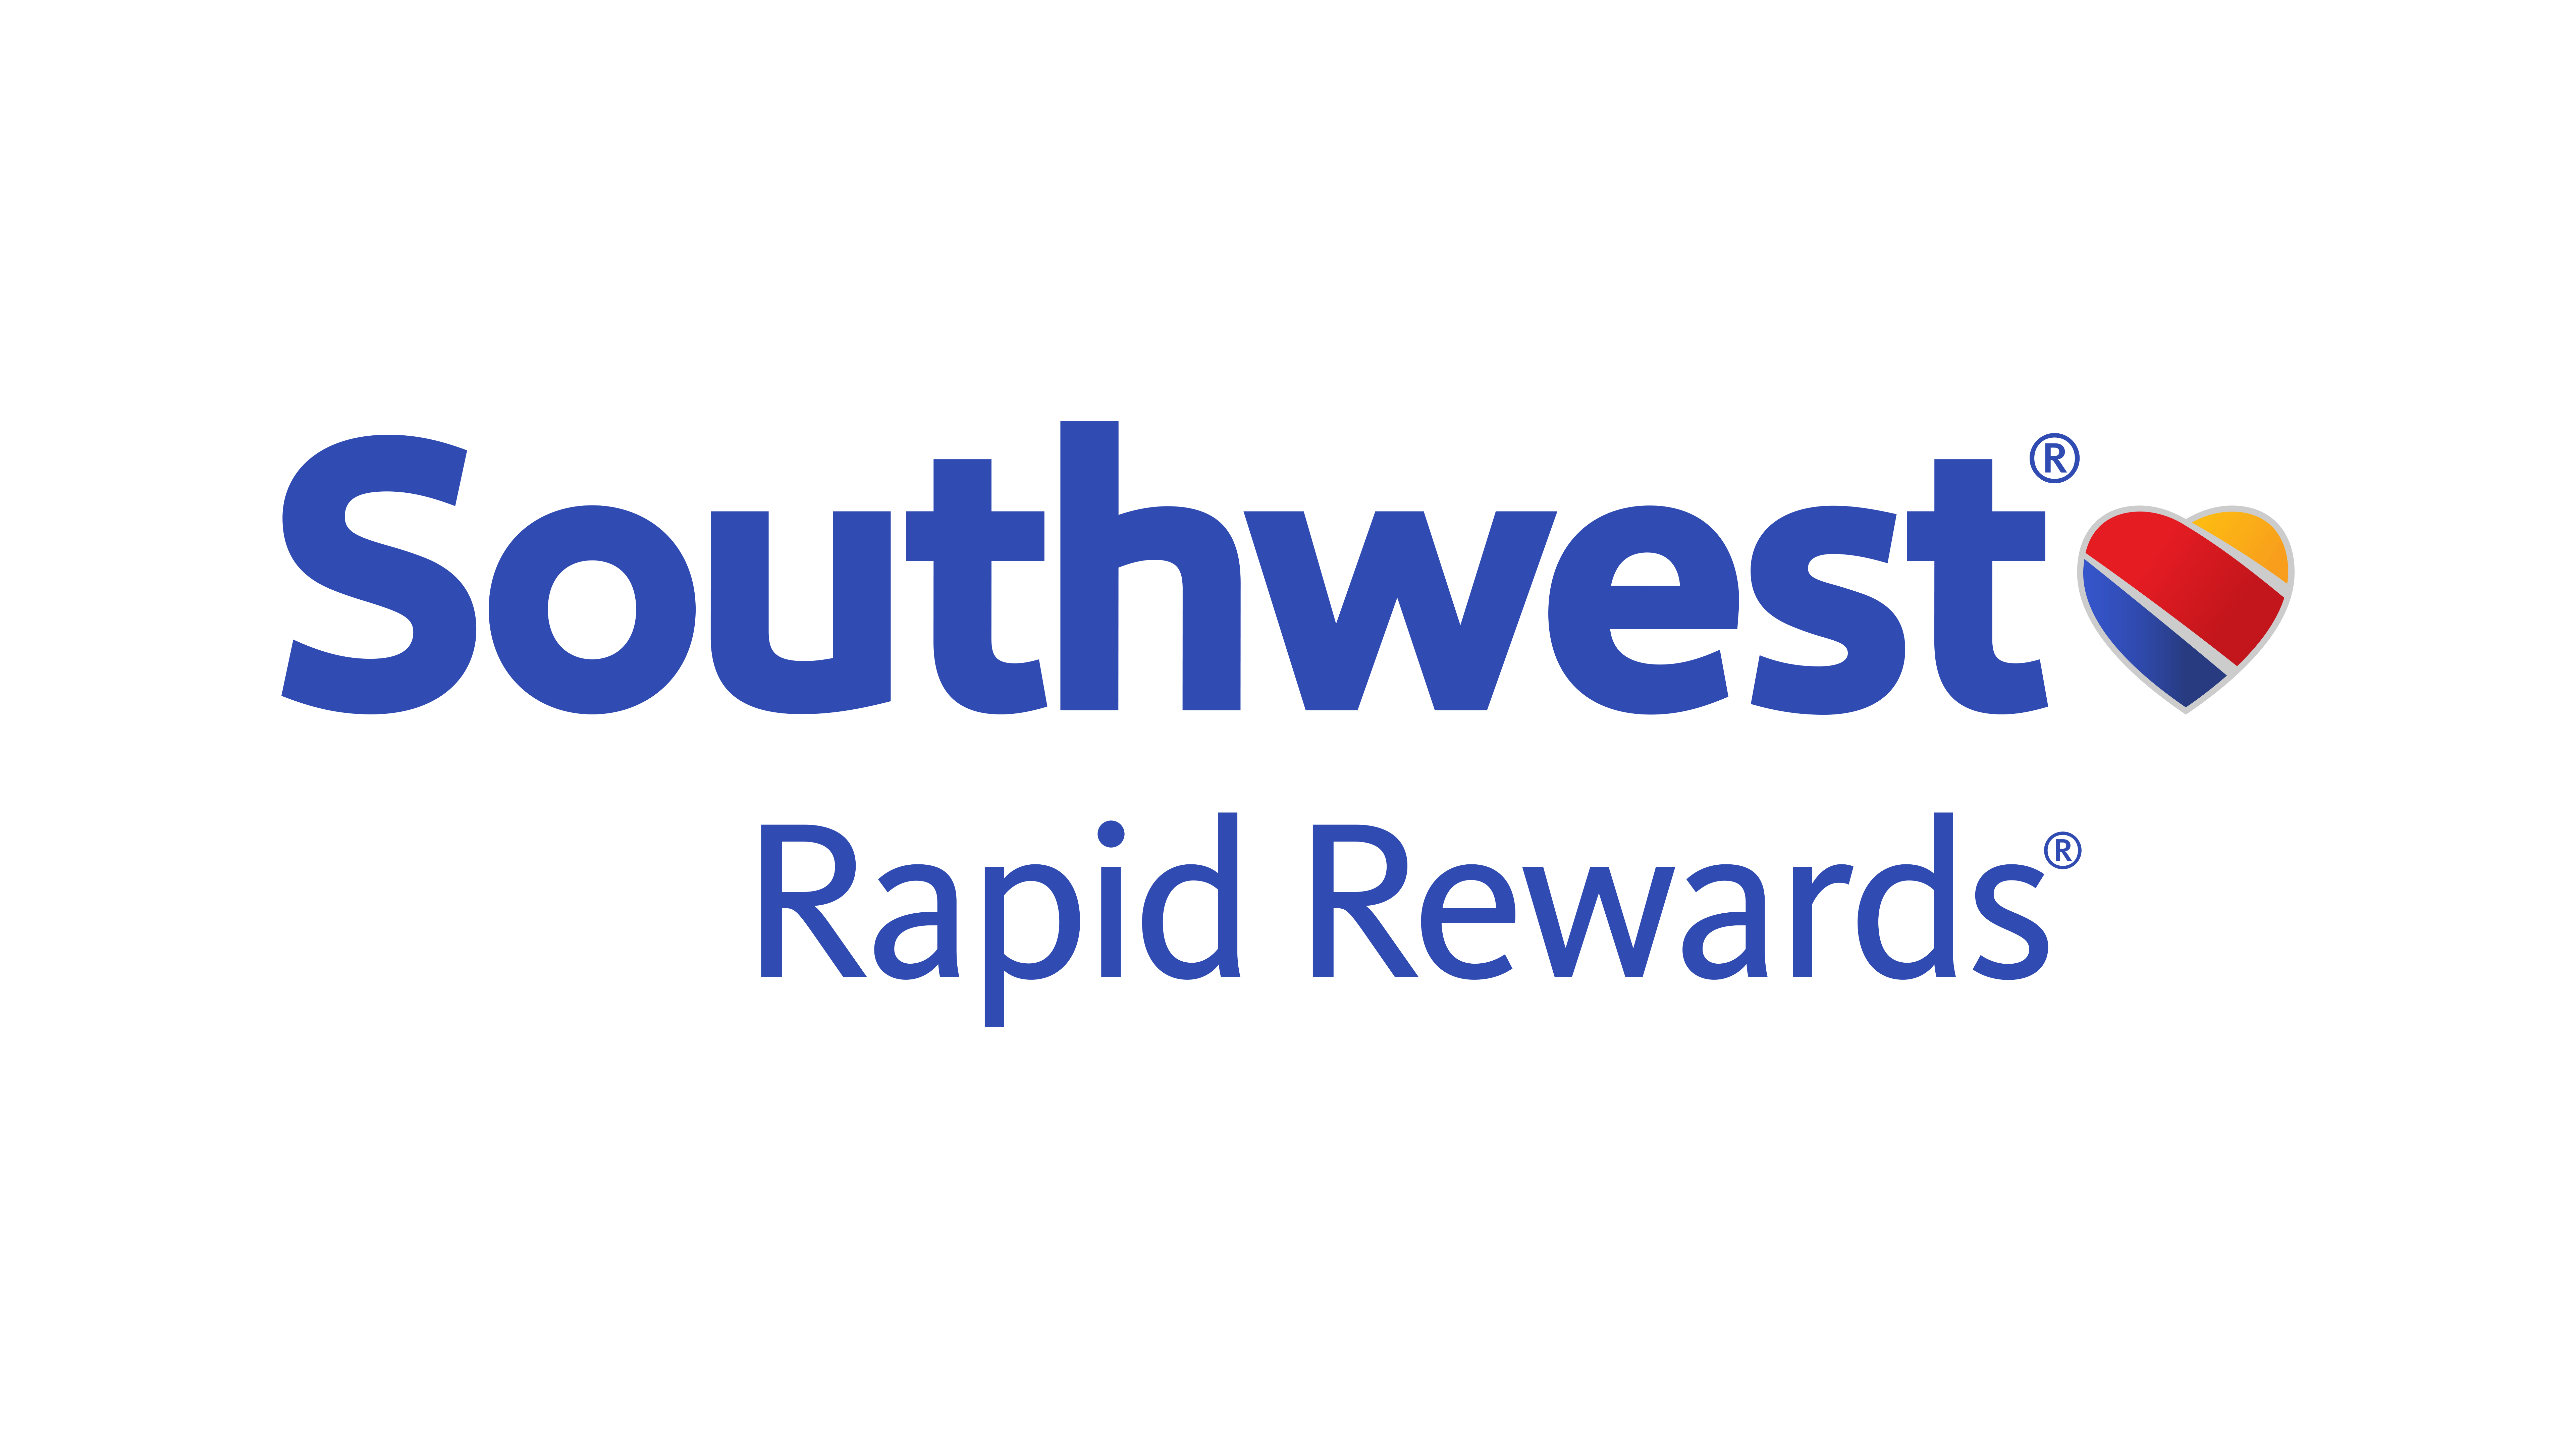 Southwest Company Logo - Rapid Rewards Turns 5 Years Old! - The Southwest Airlines Community